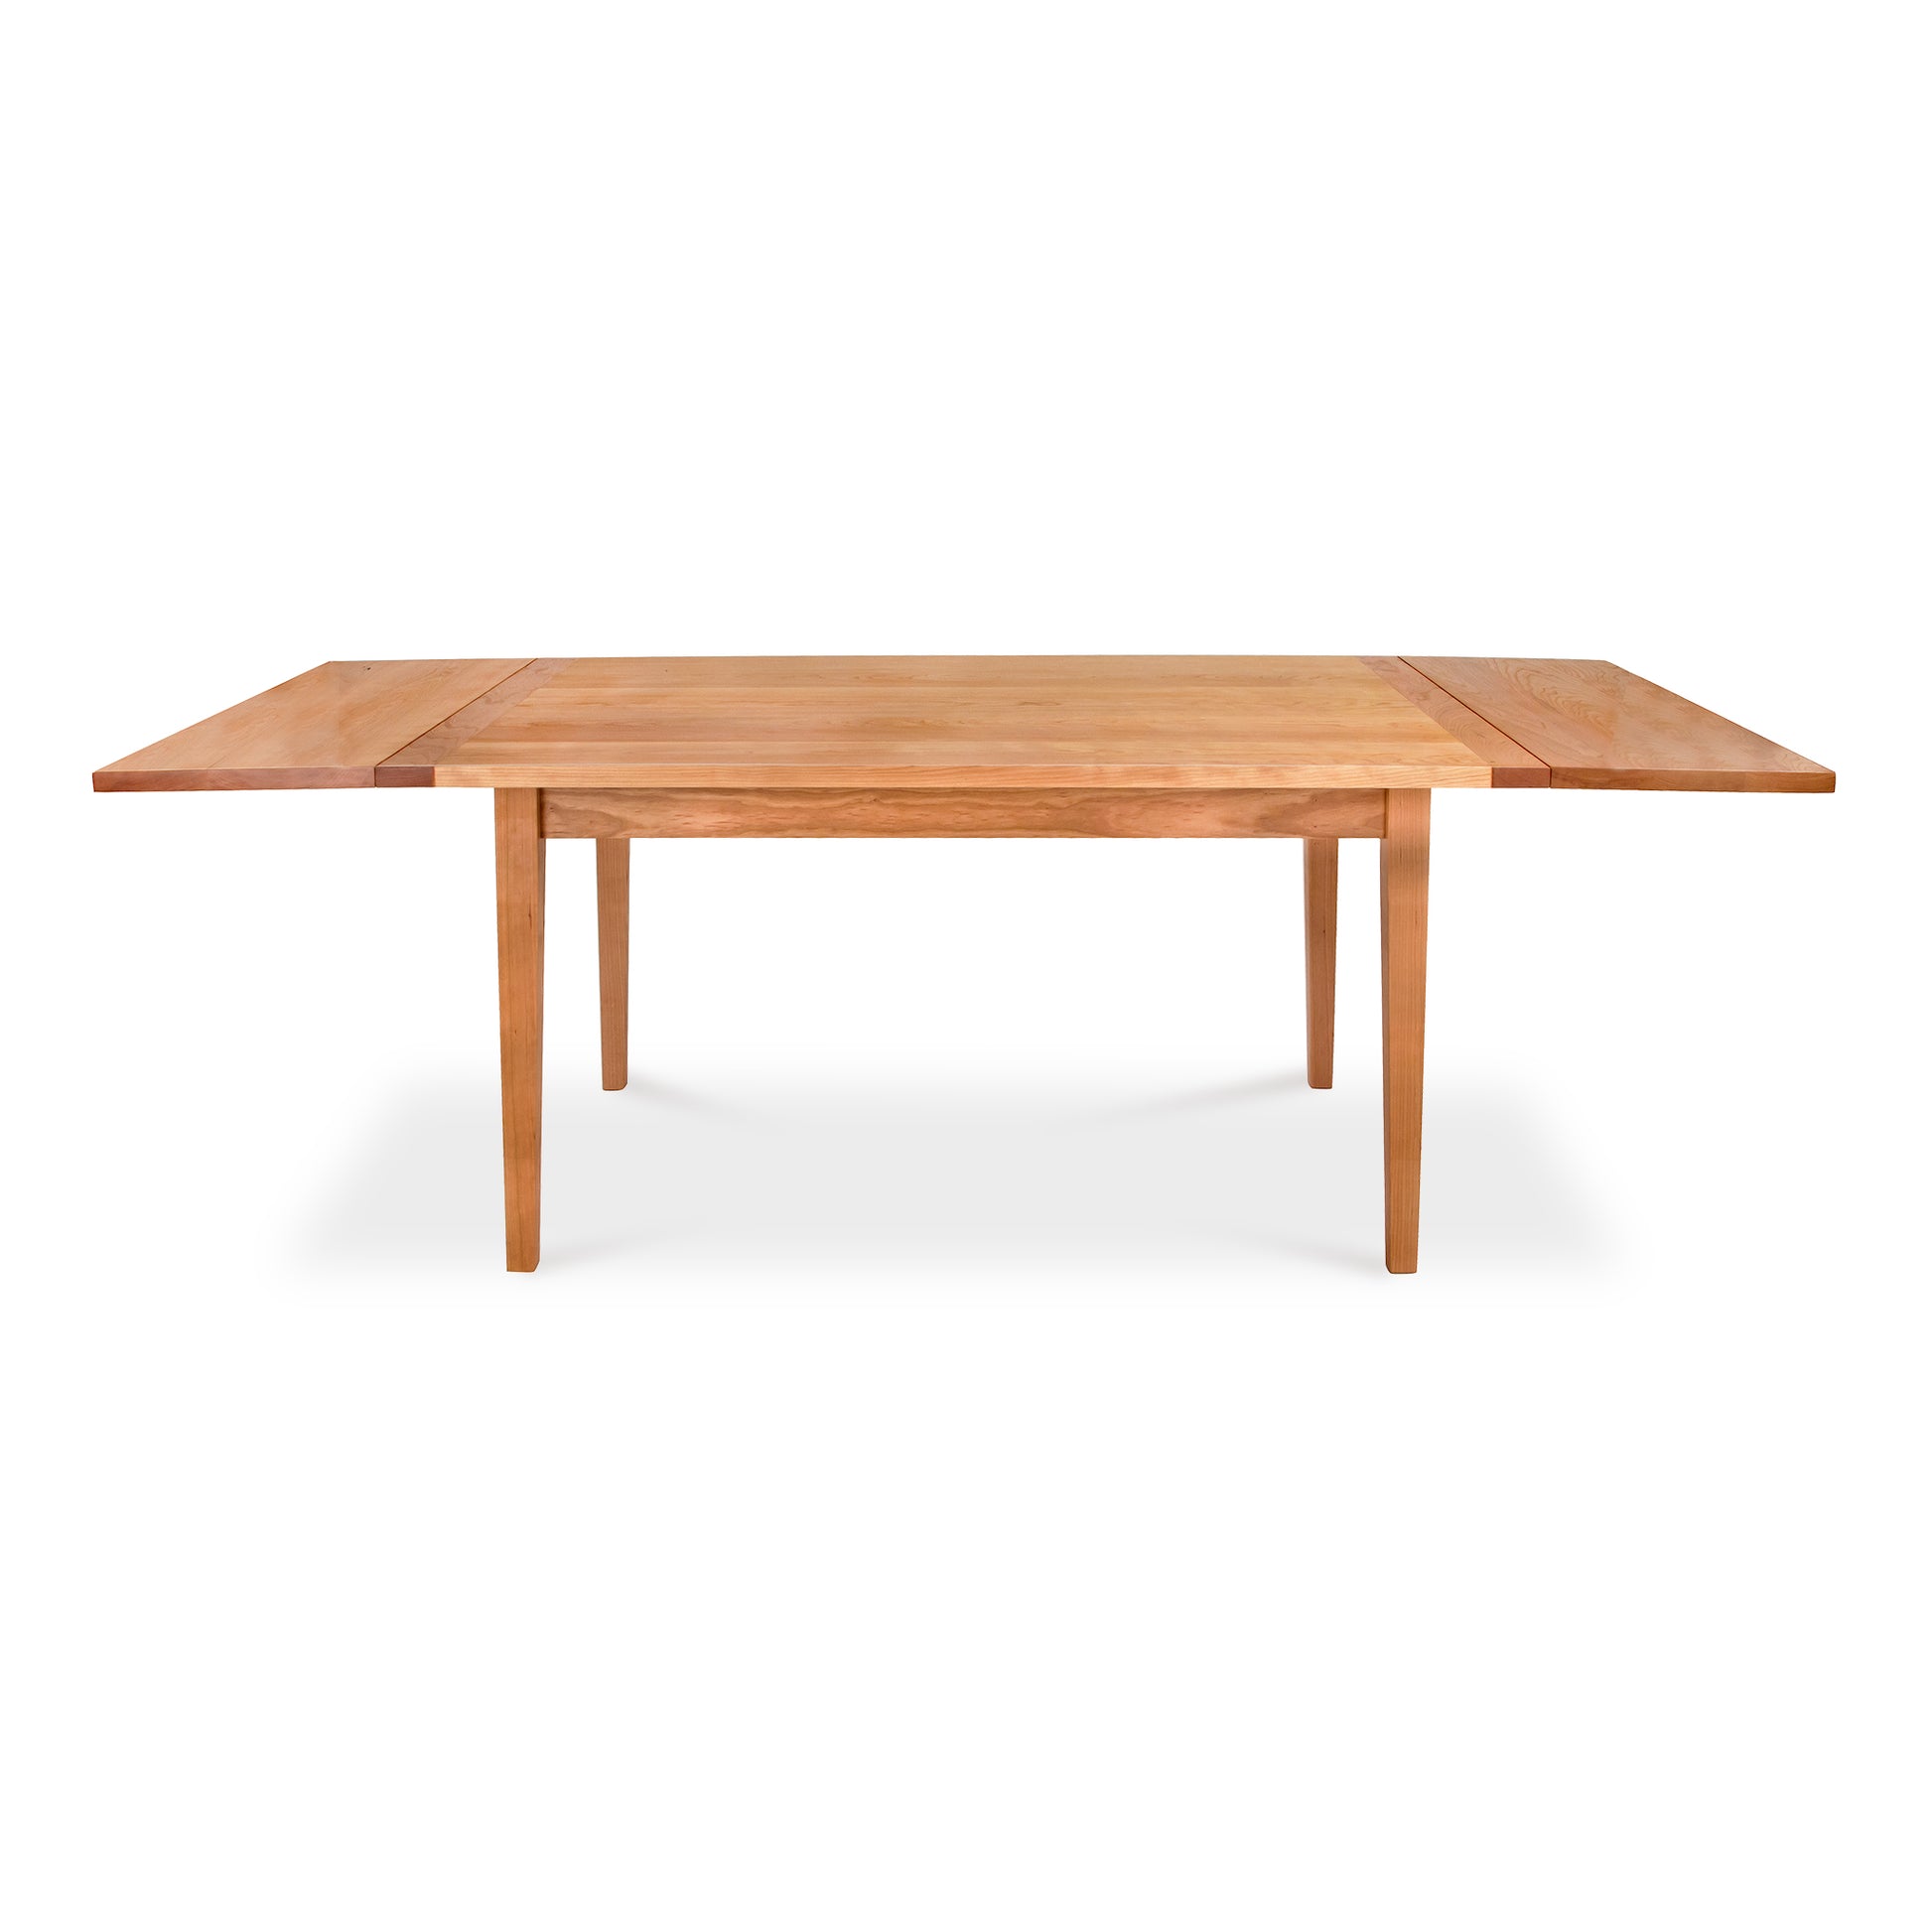 A Vermont Shaker Harvest Extension Dining Table, crafted from sustainably harvested woods by Maple Corner Woodworks, with two extendable leaves, shown extended, on a plain white background.